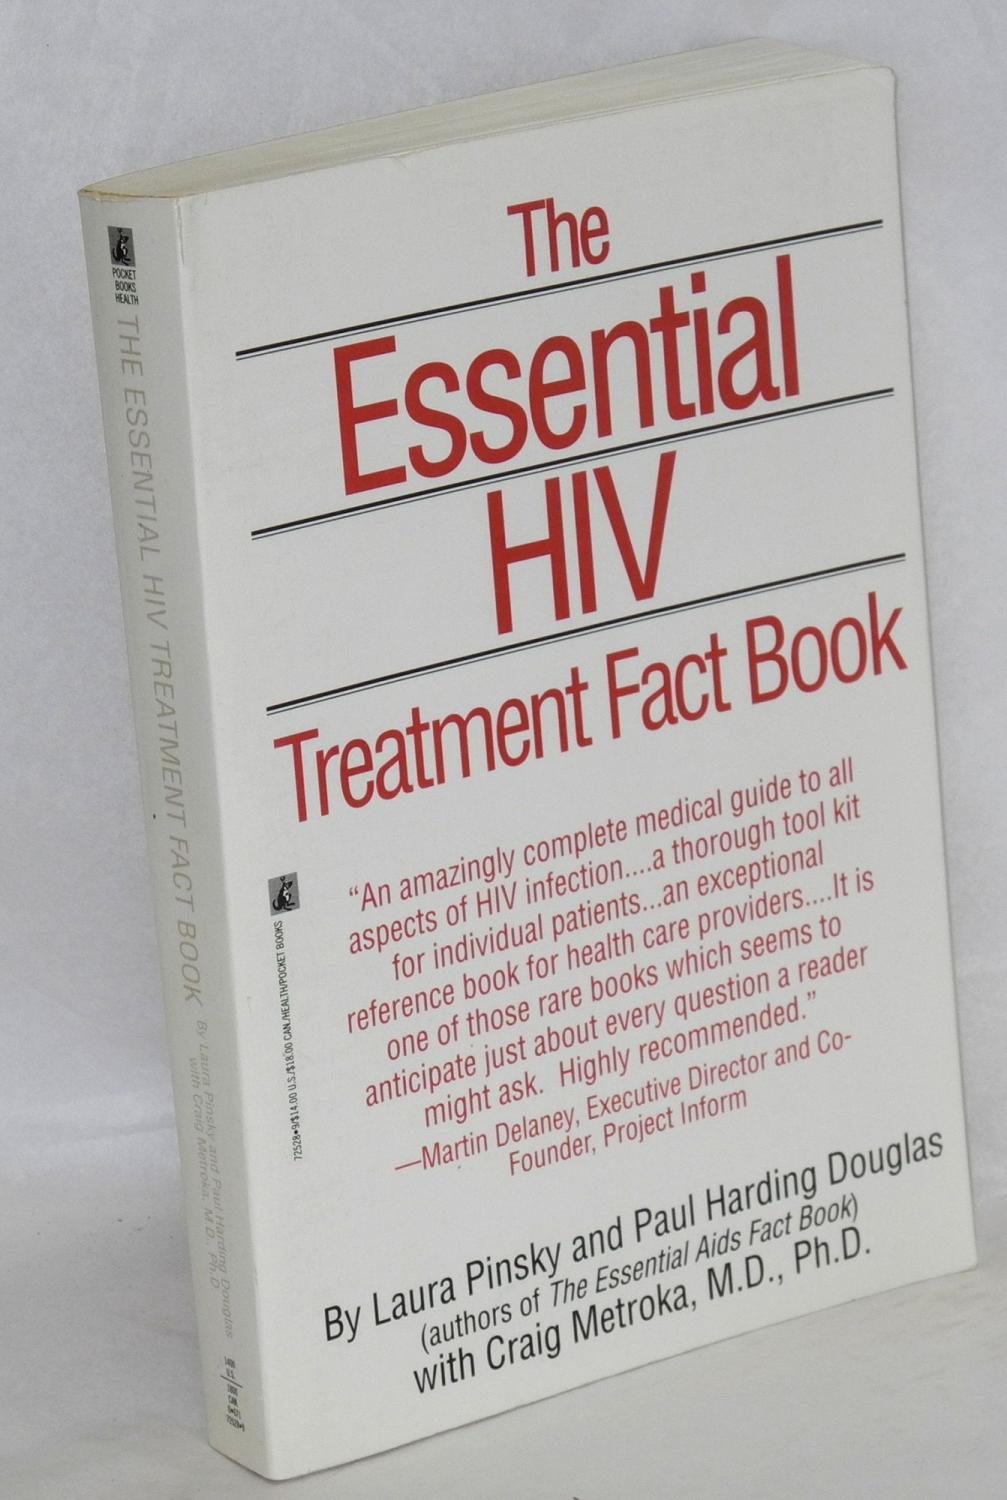 research books on hiv